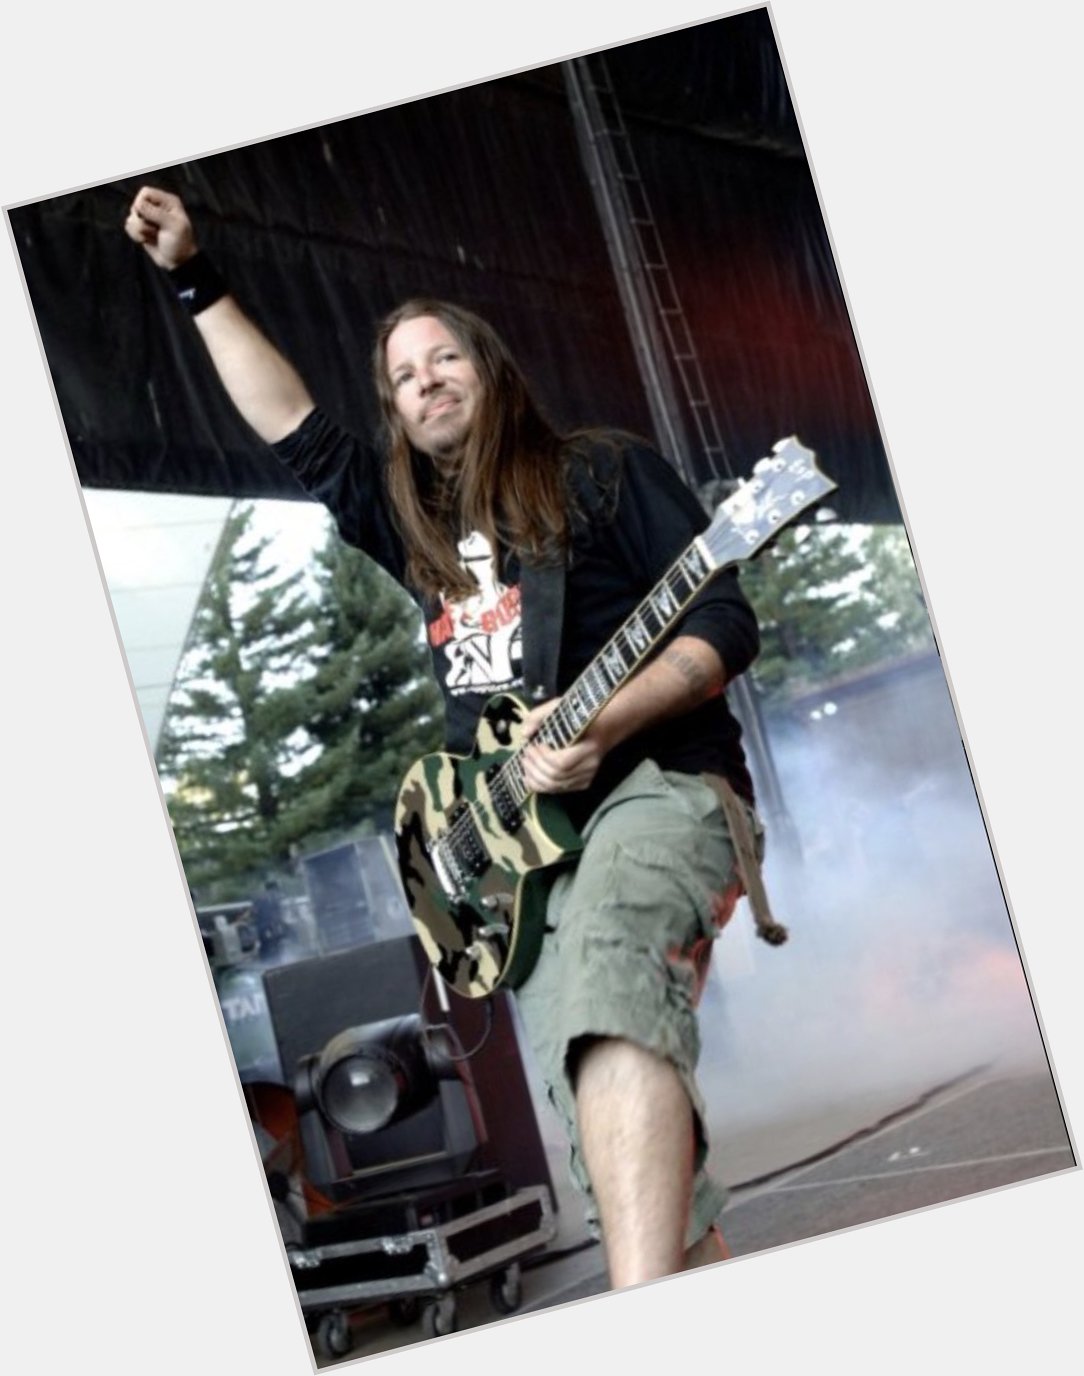 Happy Birthday to the great Lamb of God Guitarist,
Willie Adler \\m/.....    